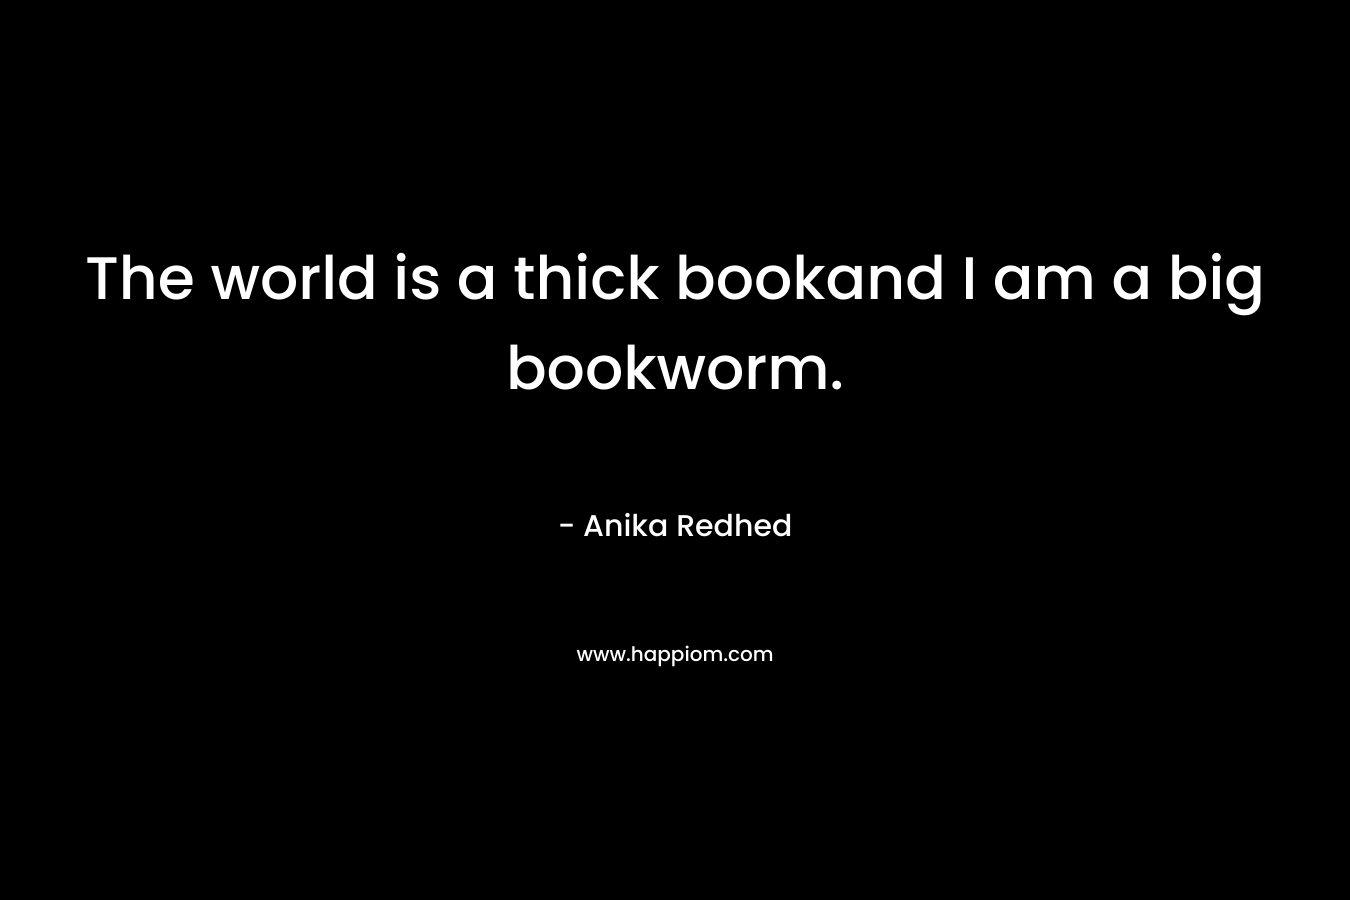 The world is a thick bookand I am a big bookworm. – Anika Redhed